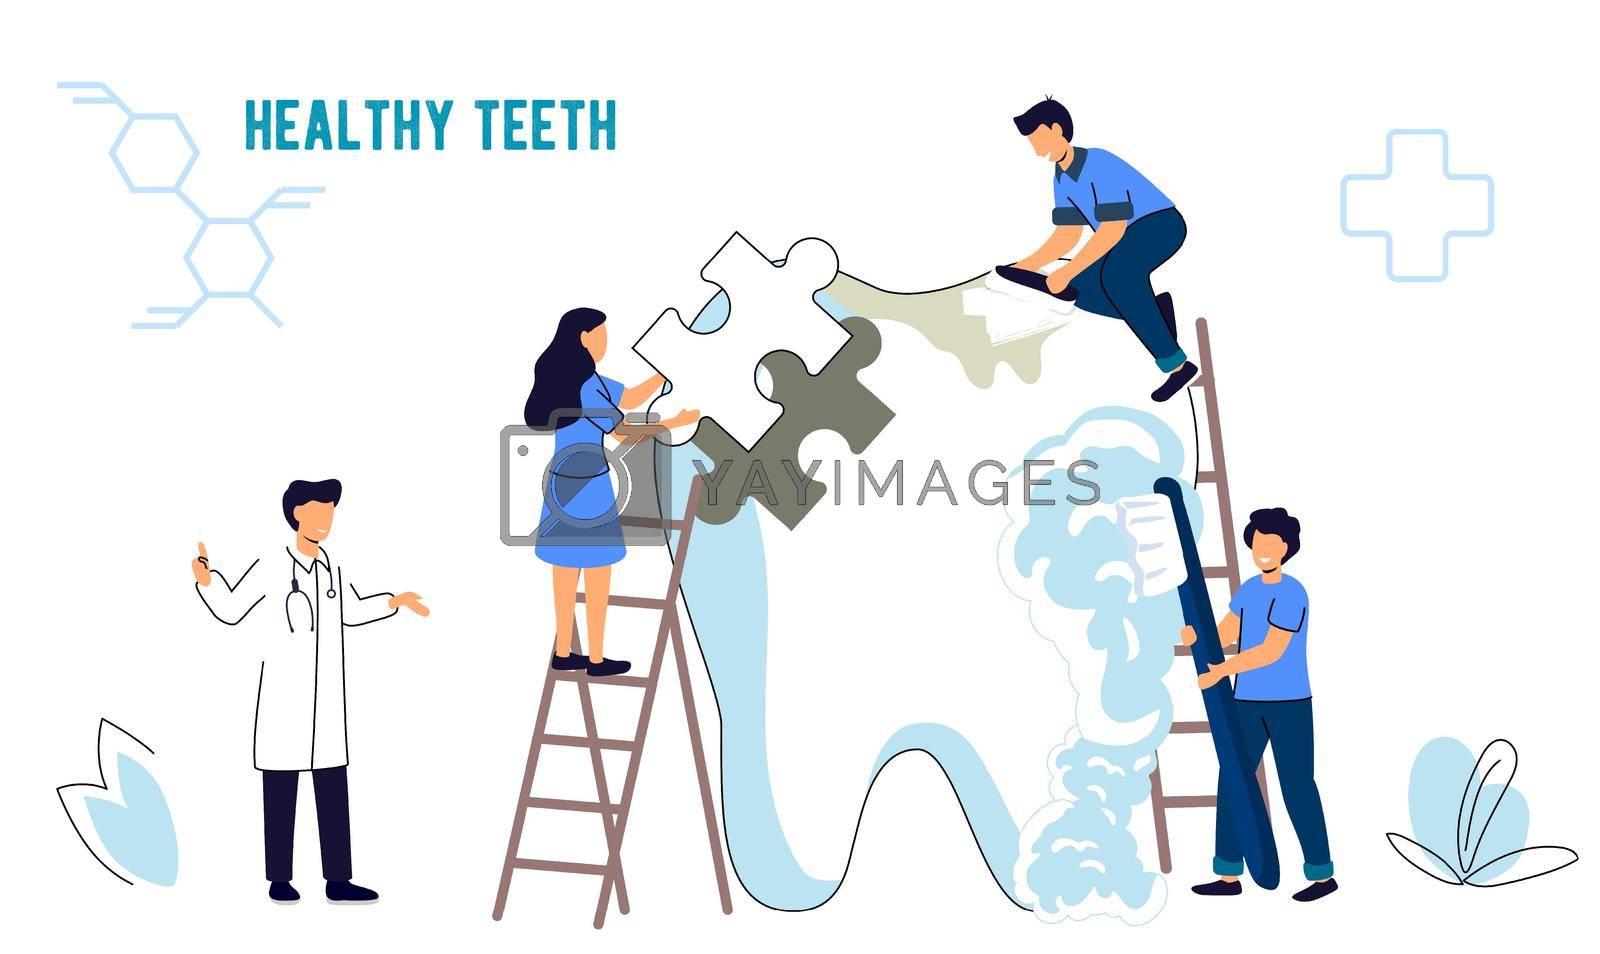 Dentist checkup Stomatology Dental Care flat vector illustration concept Dentistry work Tiny people caring for a tooth Protect human teeth from caries and health prevention. Hygiene technology